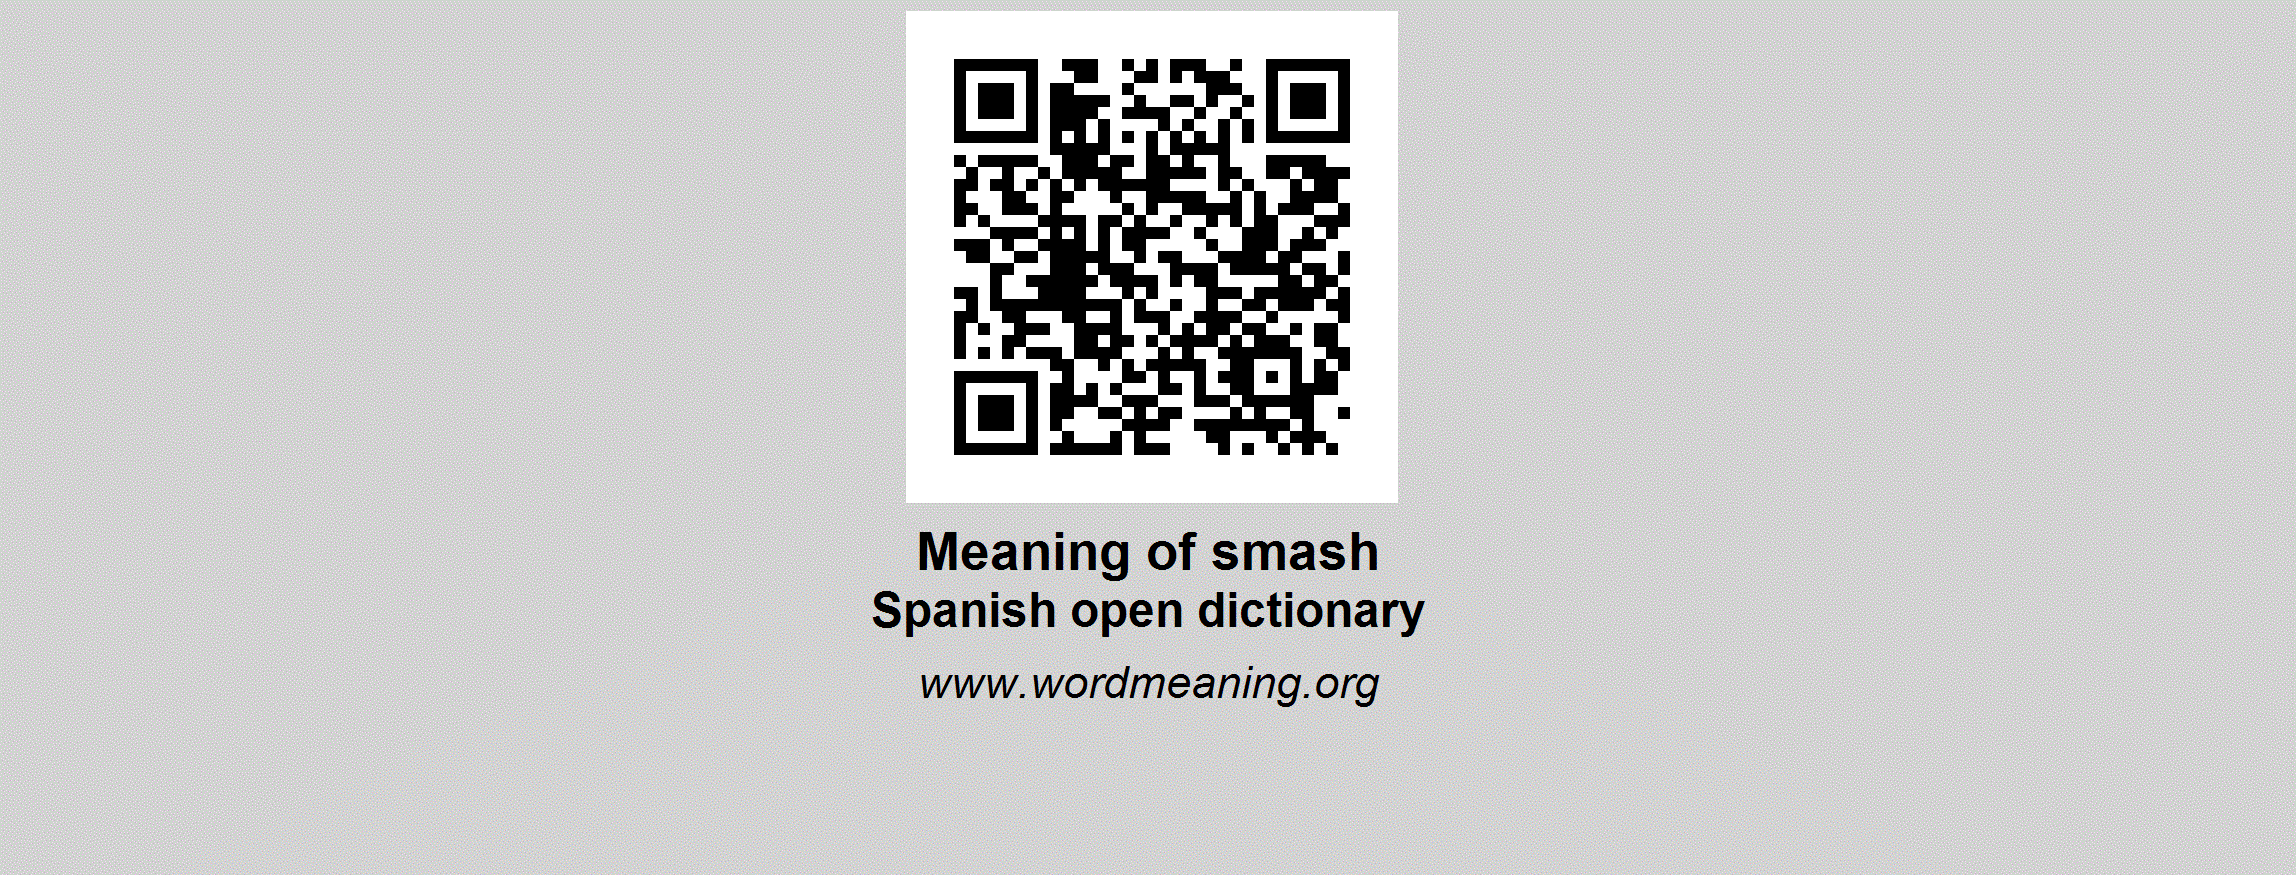 Smash Definition & Meaning